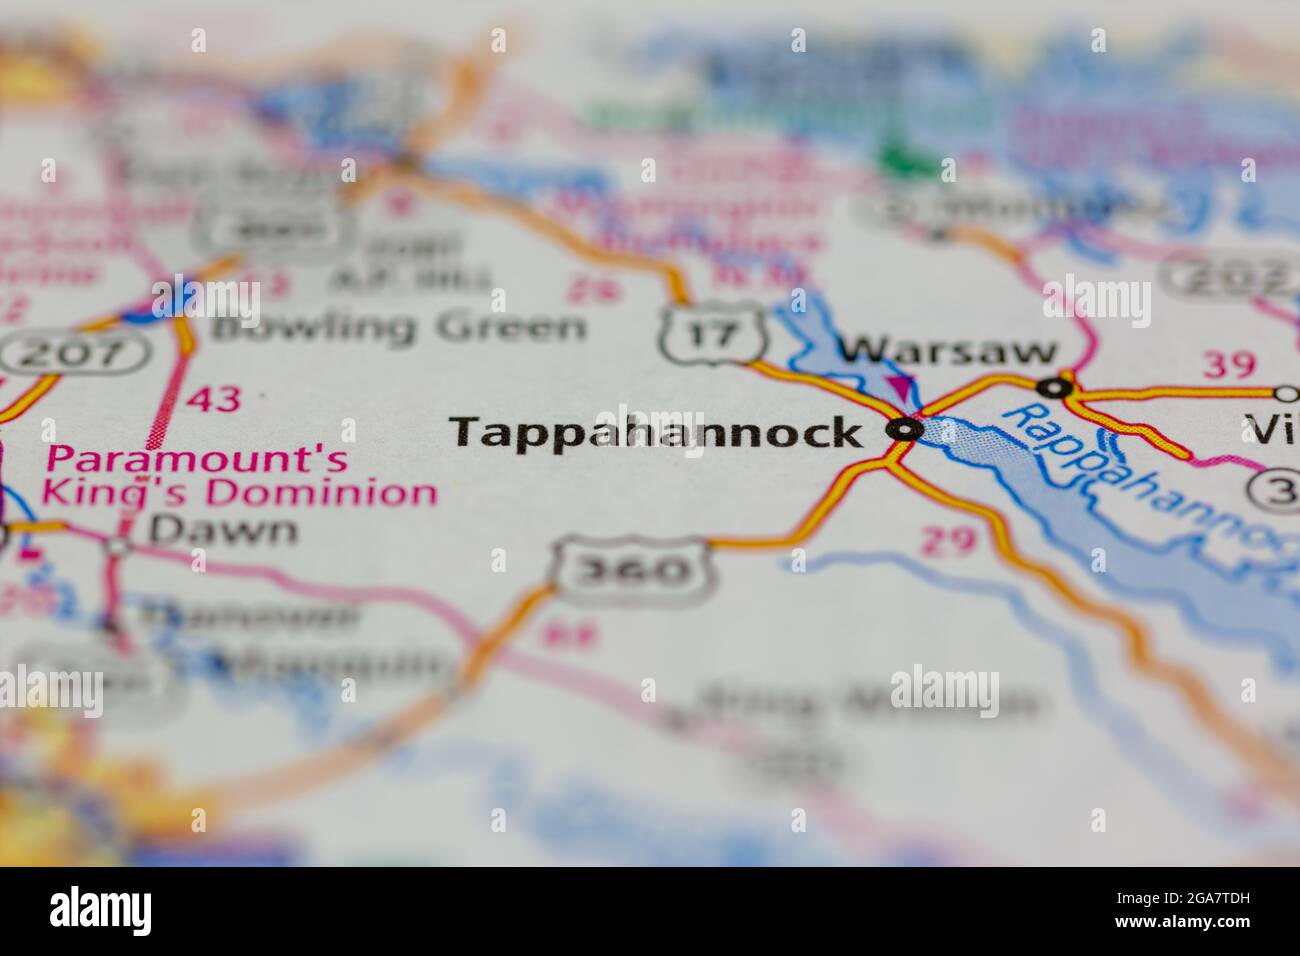 Tappahannock Virginia shown on a road map or Geography map Stock Photo